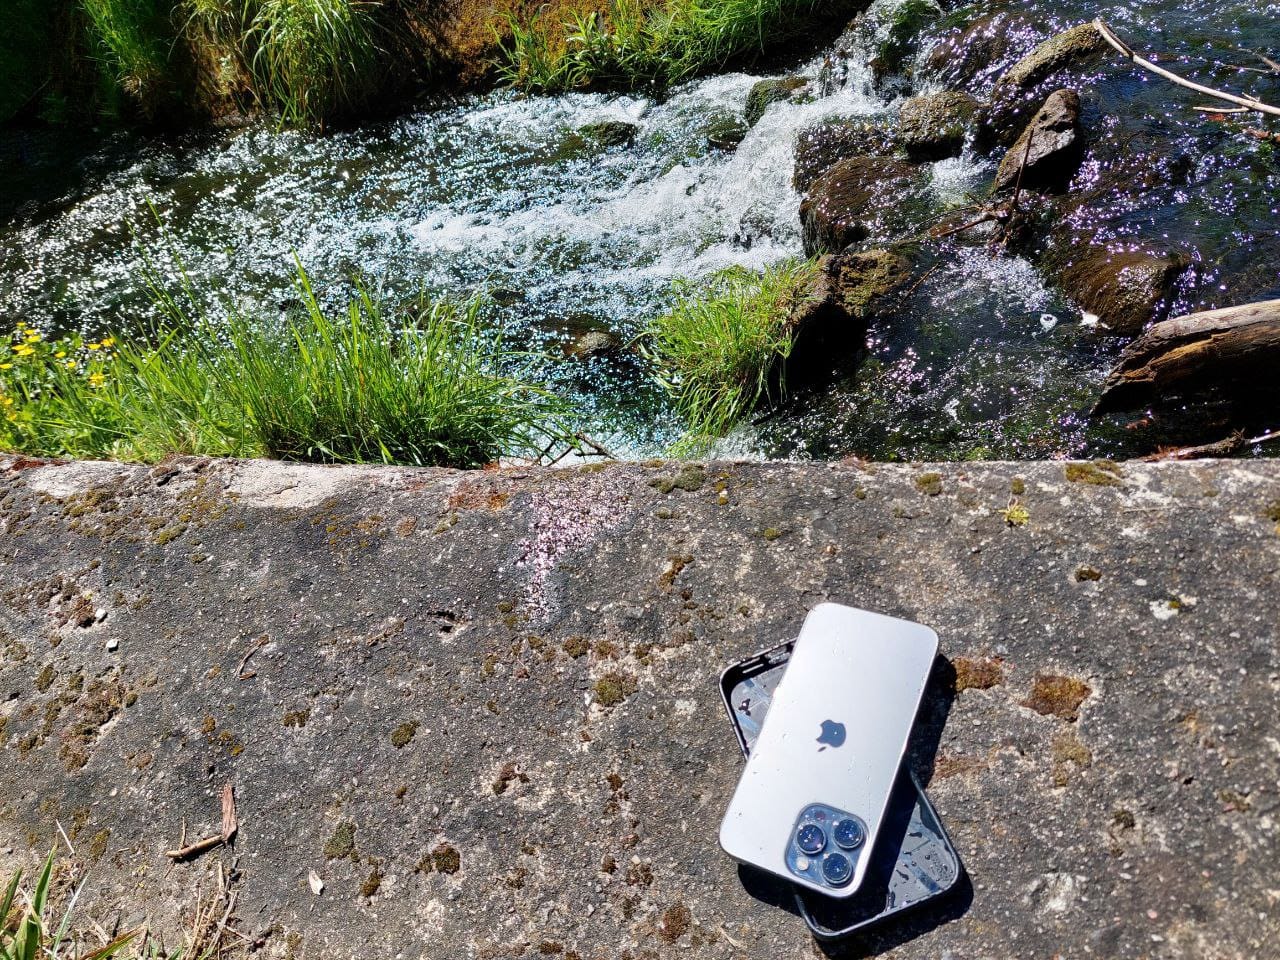 A phone recovered from a cold Pomeranian spring